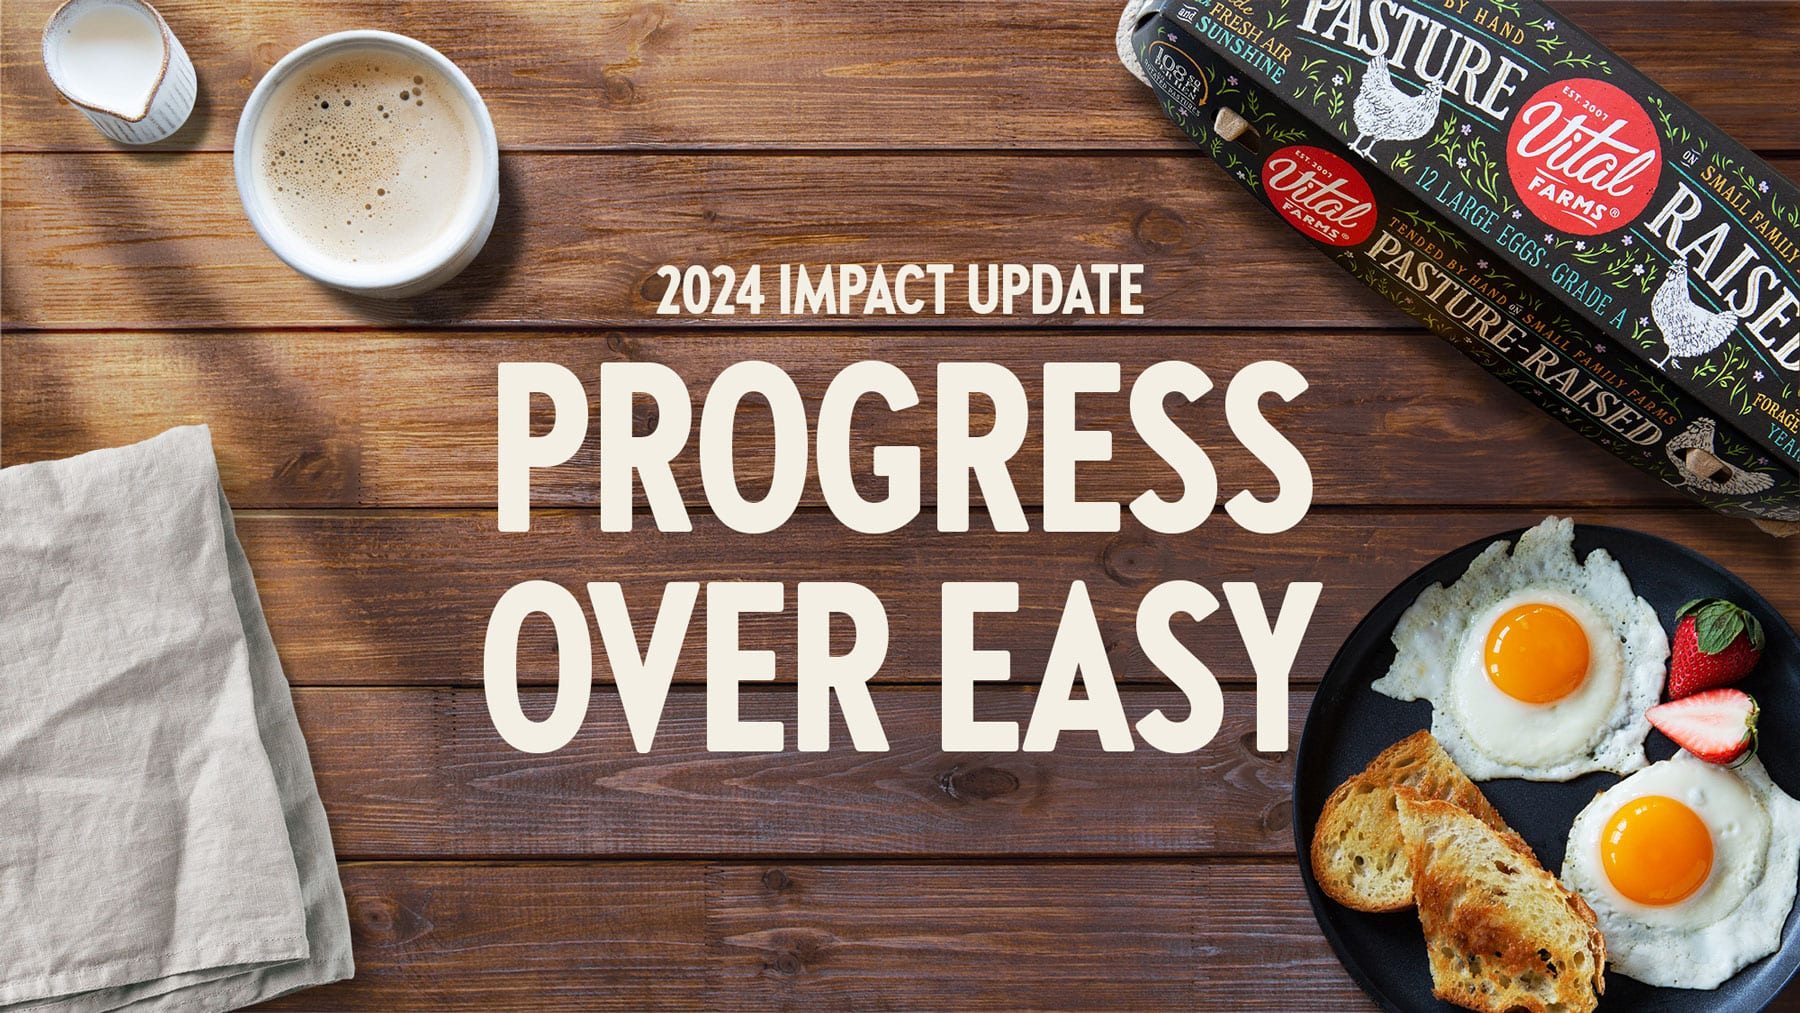 2024 Impact Update - Progress Over Easy text over image of eggs on table